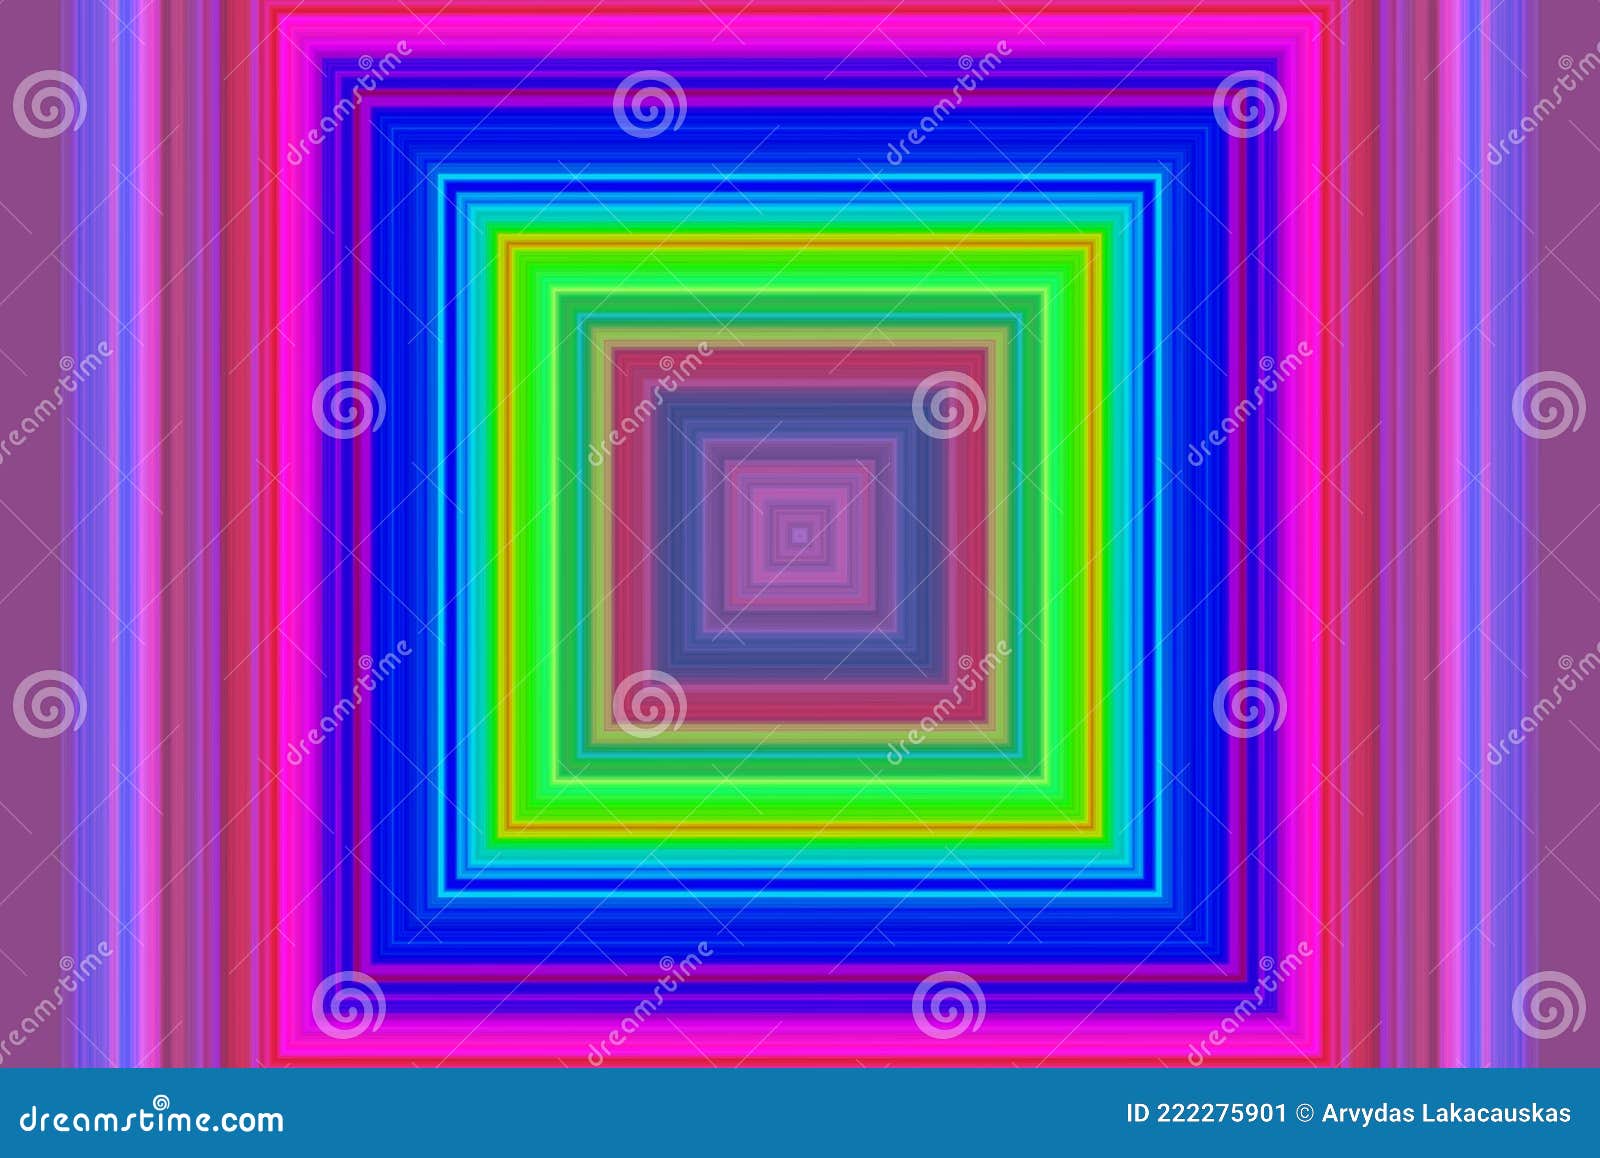 Abstract Hypnotic Square Psychedelic Background,vibrant Colors Virtual ...